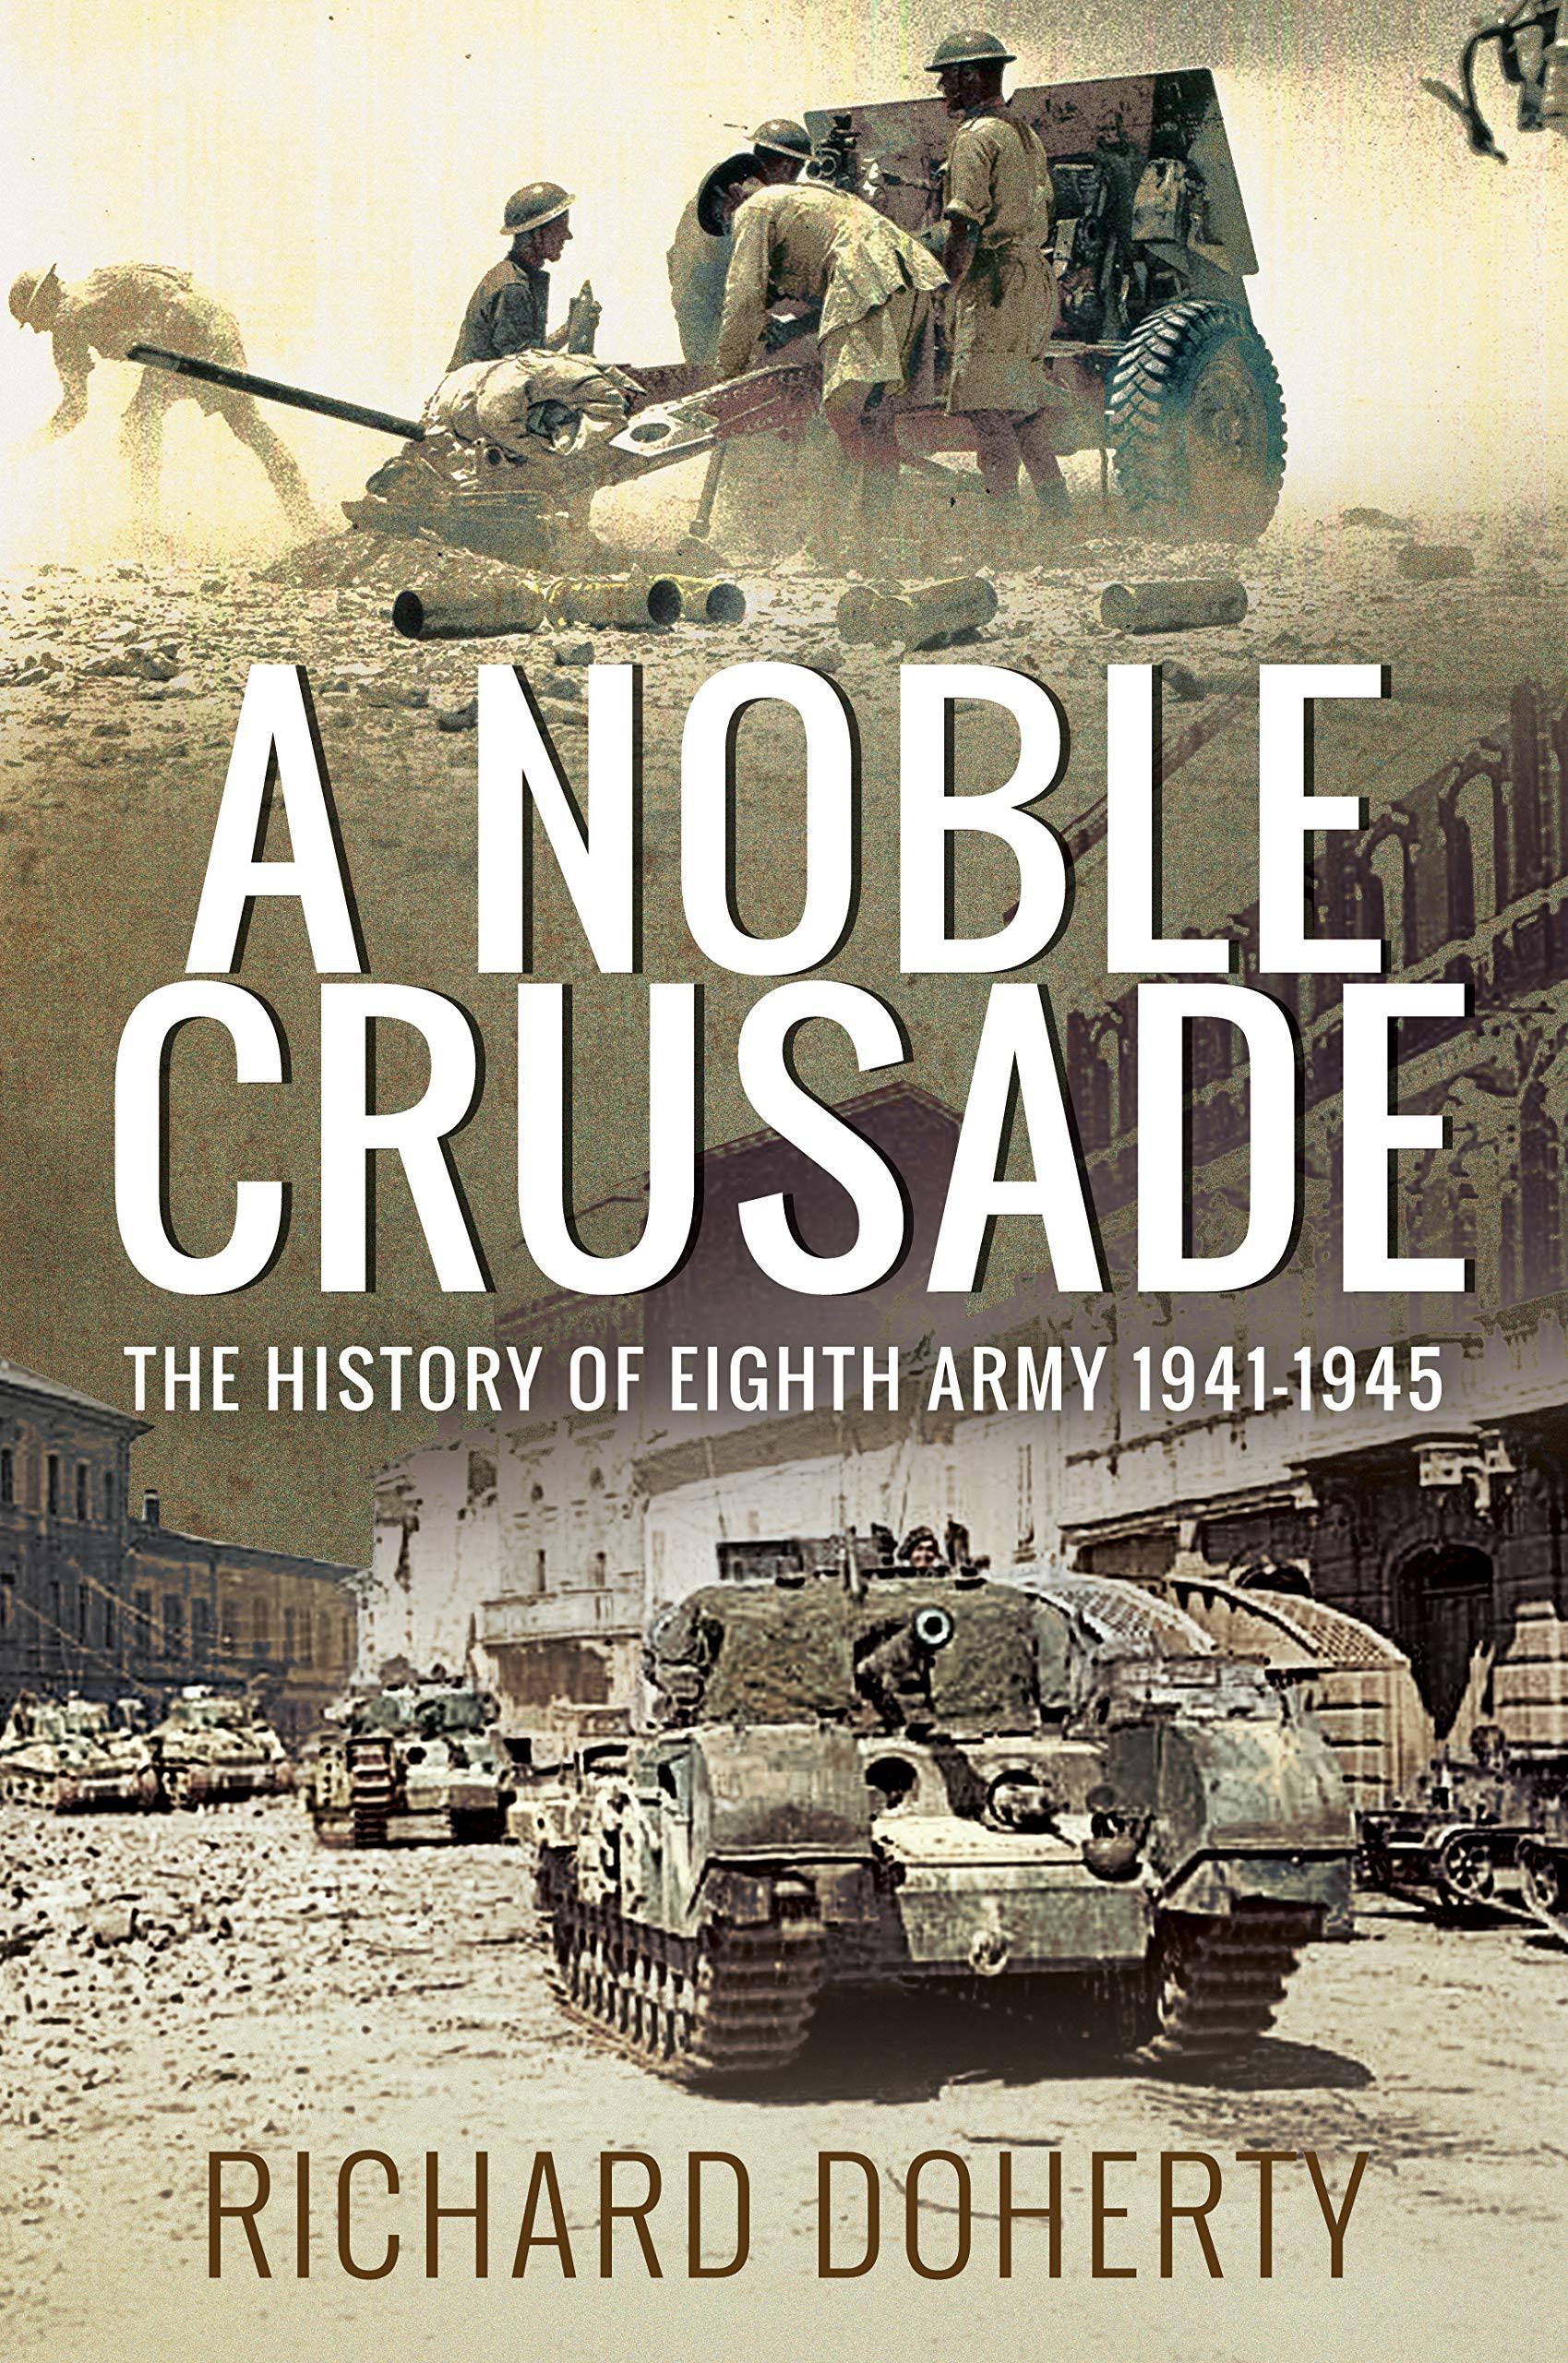 A Noble Crusade: The History of the Eighth Army, 1941-1945 [Book]